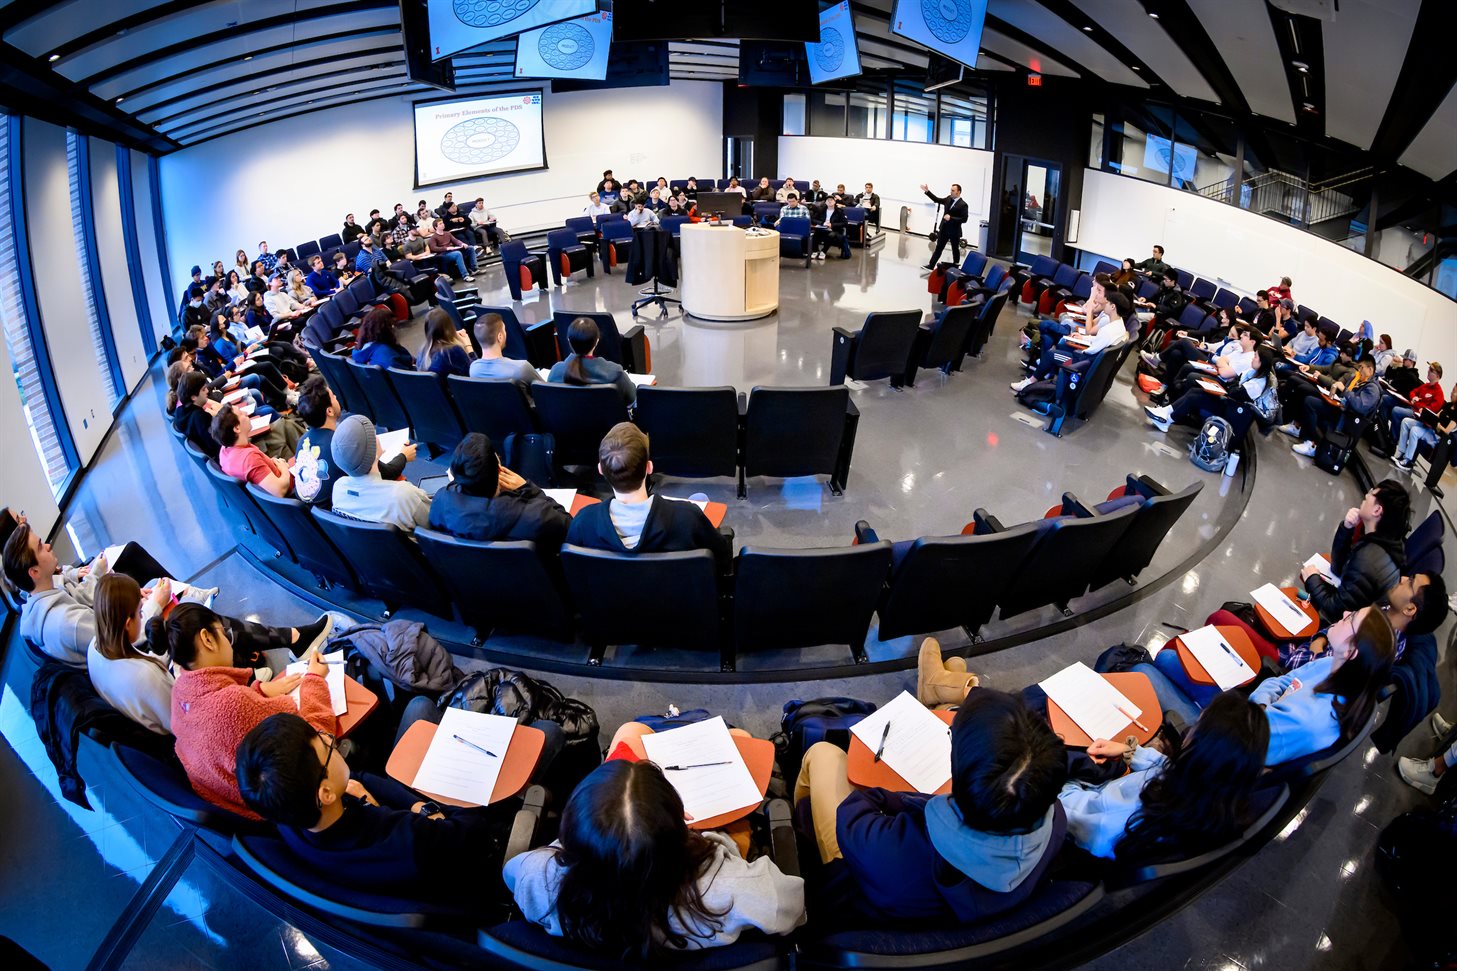 Students work and discuss design projects in a round classroom with numerous monitors hanging from the ceiling and a central podium designed to allow faculty and students to see each other more clearly.